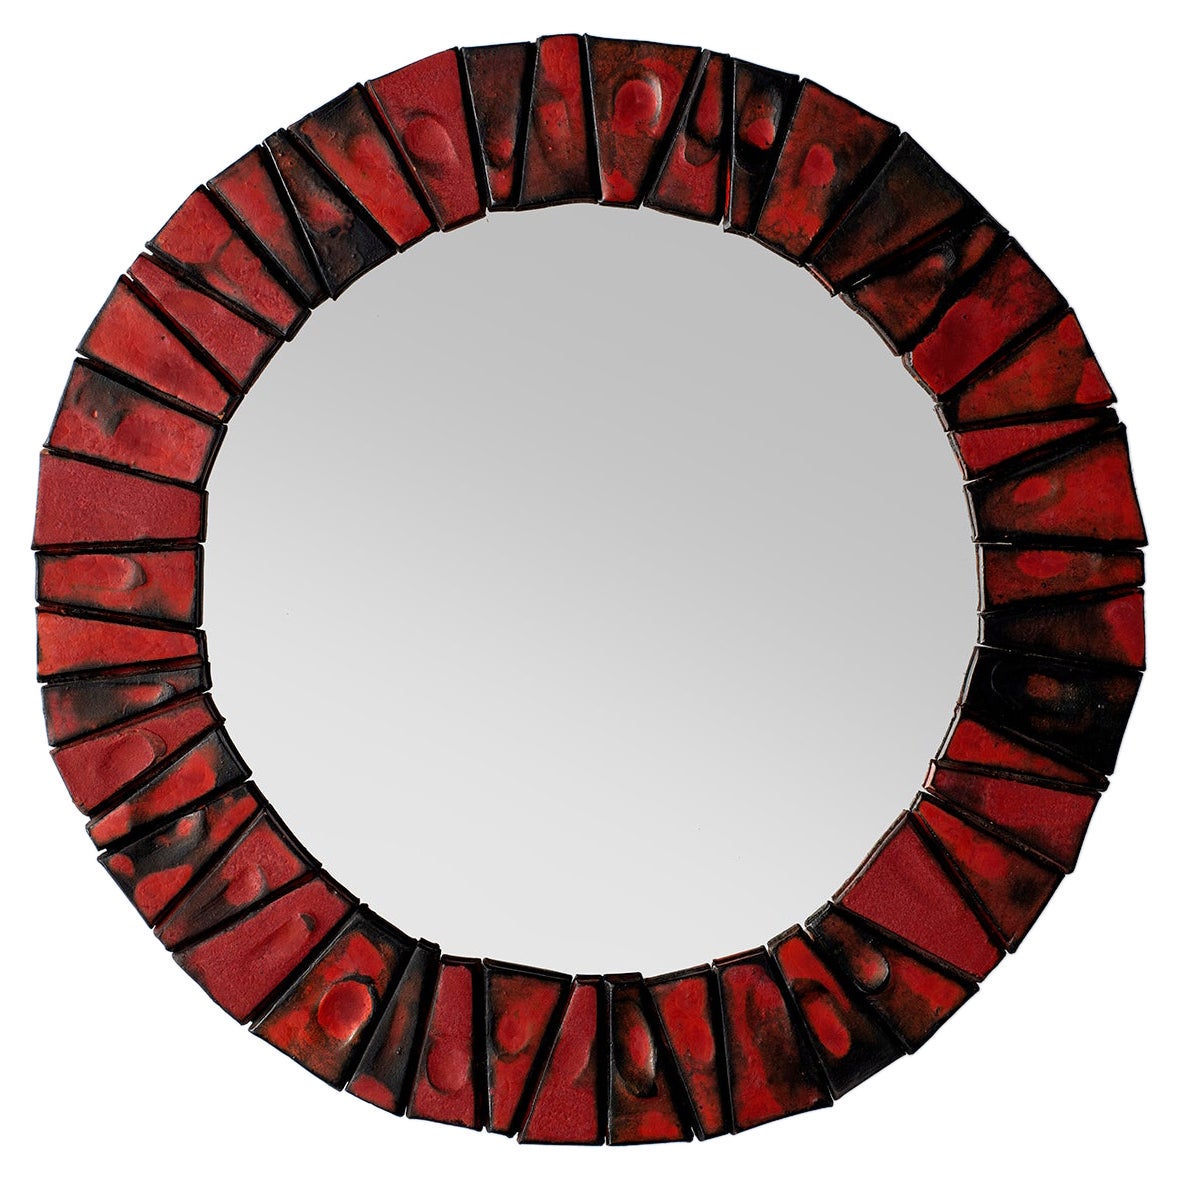 Midcentury Red Ceramic Tiled Round Wall Mirror  For Sale